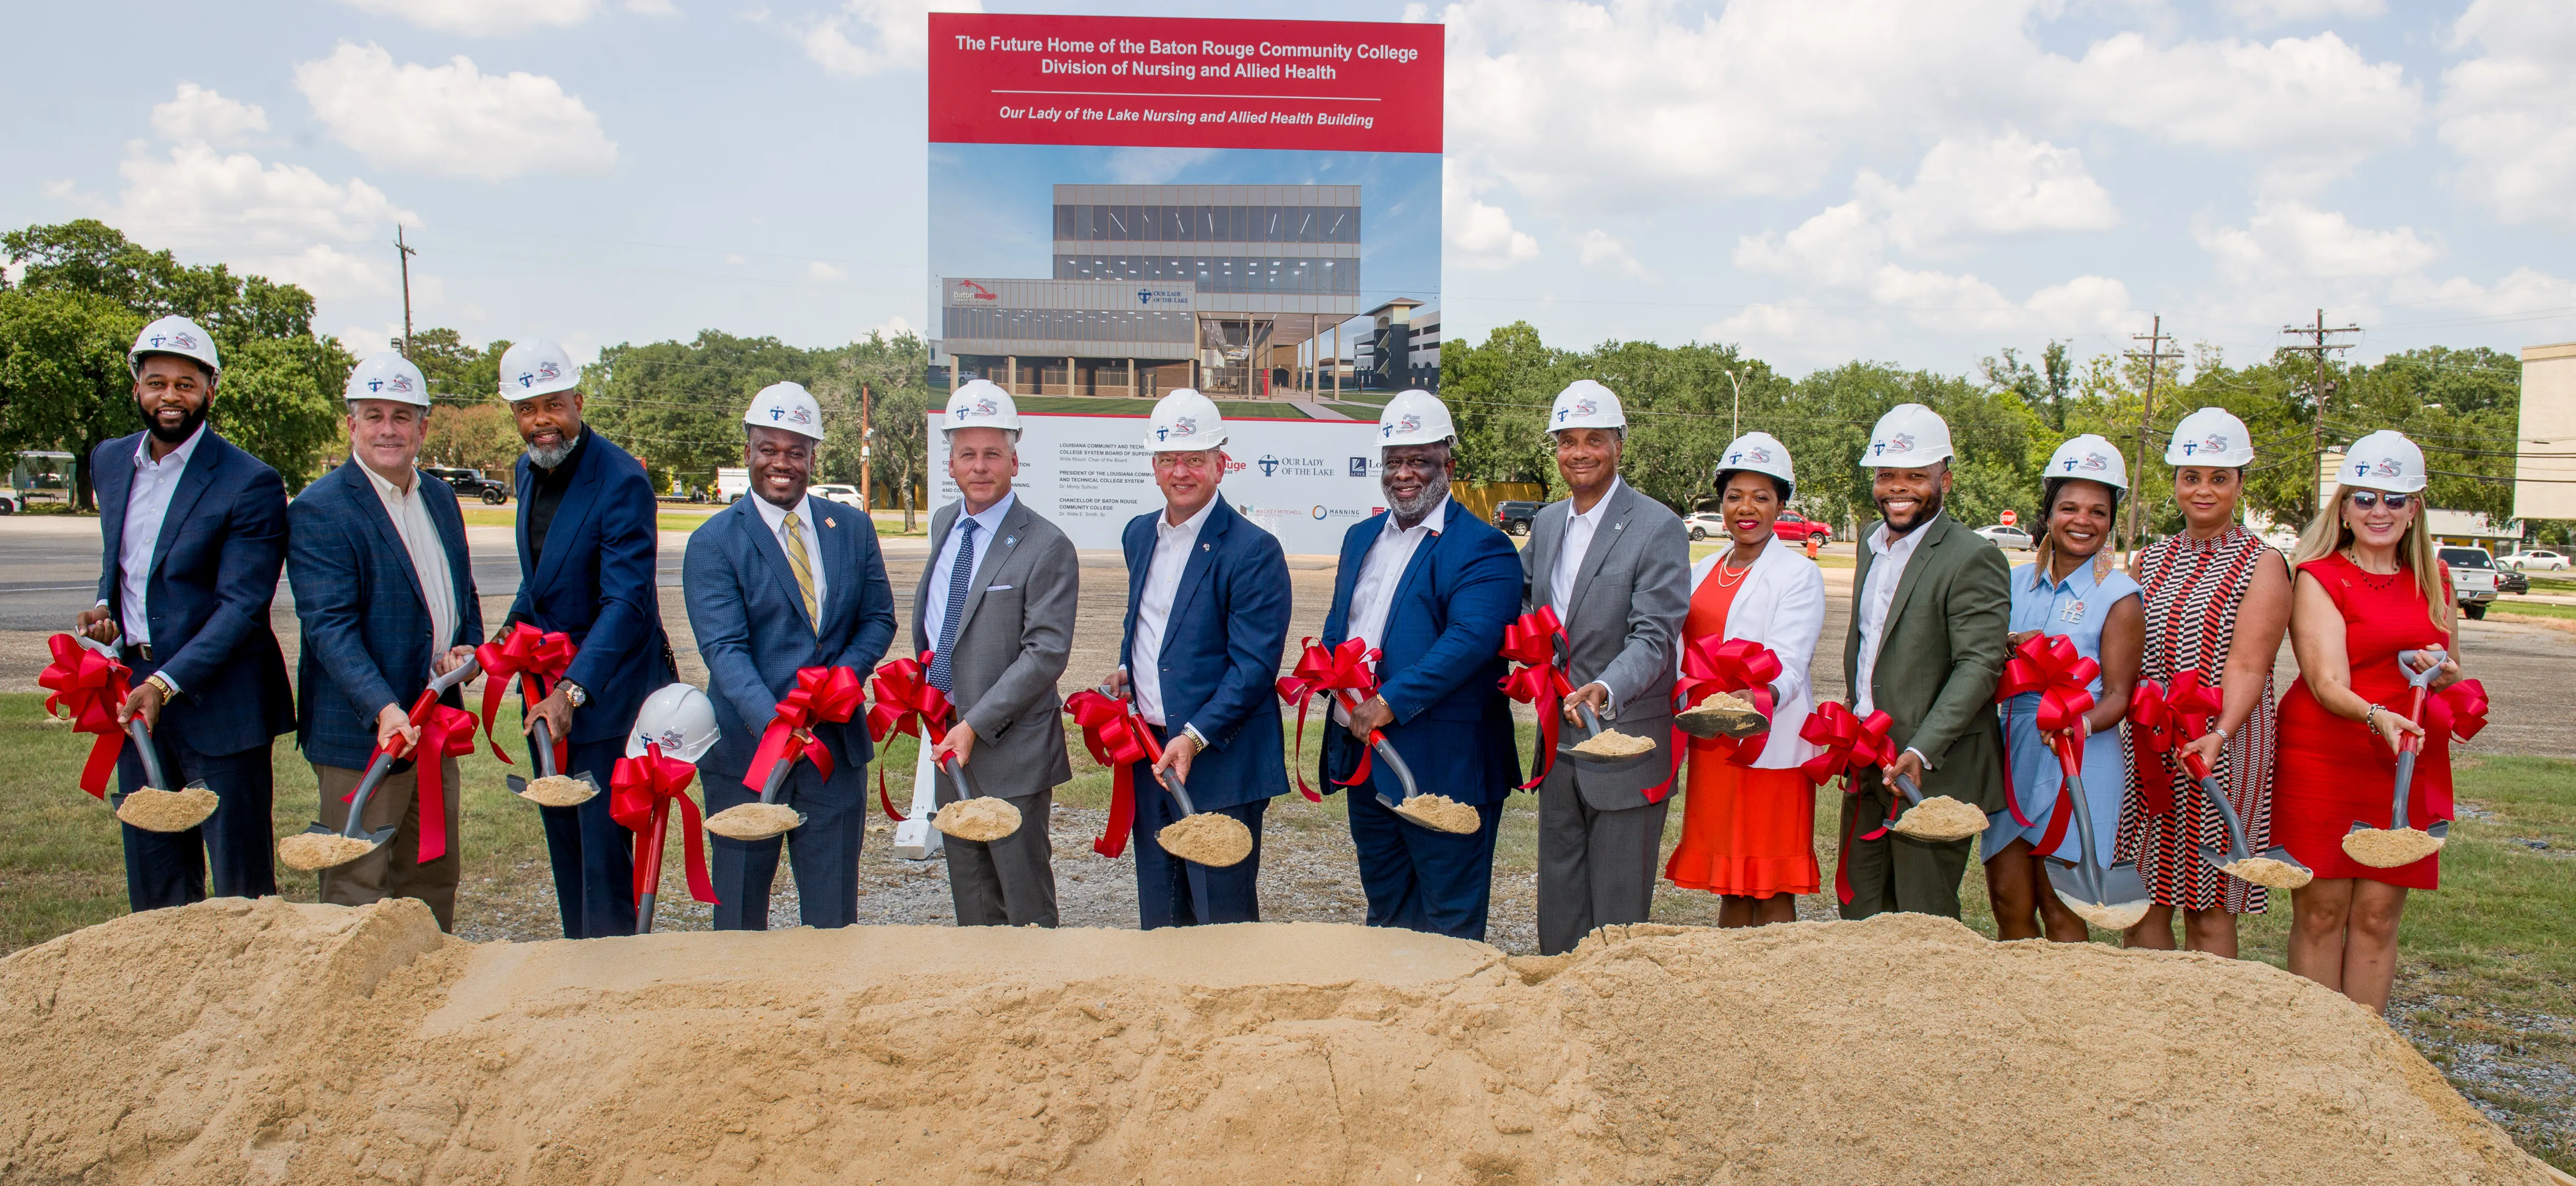  Representatives from Baton Rouge Community College and Our Lady of the Lake break ground on the new Nursing and Allied Health Building during a groundbreaking ceremony on the BRCC Mid City Campus on Thursday, Aug. 8, 2023. Pictured (l to r): Curry Allen, Director of Operations, Our Lady of the Lake Physician Group; Chris Haslitt, Architect, Chasm Architecture; Nathaniel Clark, Managing Partner, Chasm Architecture; Corlin LeBlanc, Vice Chancellor for Finance and Administration, BRCC; Dr. James E. Craven, President, Physician Group, Our Lady of the Lake; Governor John Bel Edwards; Dr. Willie E. Smith, Chancellor, BRCC; Alterman “Chip” Jackson, Vice Chair, Louisiana Community and Technical College System Board of Supervisors; Tina Schaffer, Vice President of Talent Strategy and Chief DEI Officer, Franciscan Missionaries of Our Lady Health System; James Hollins, Board member, Louisiana Community and Technical College System Board of Supervisors; Dr. Michelle Dennis, Dean, Division of Nursing and Allied Health, BRCC; Dr. Pamela Ravare-Jones, Vice Chancellor for Institutional Effectiveness and Strategic Initiatives, BRCC; and Dr. Pilar Blanco Eble, Vice Chancellor for Institutional Advancement, BRCC.